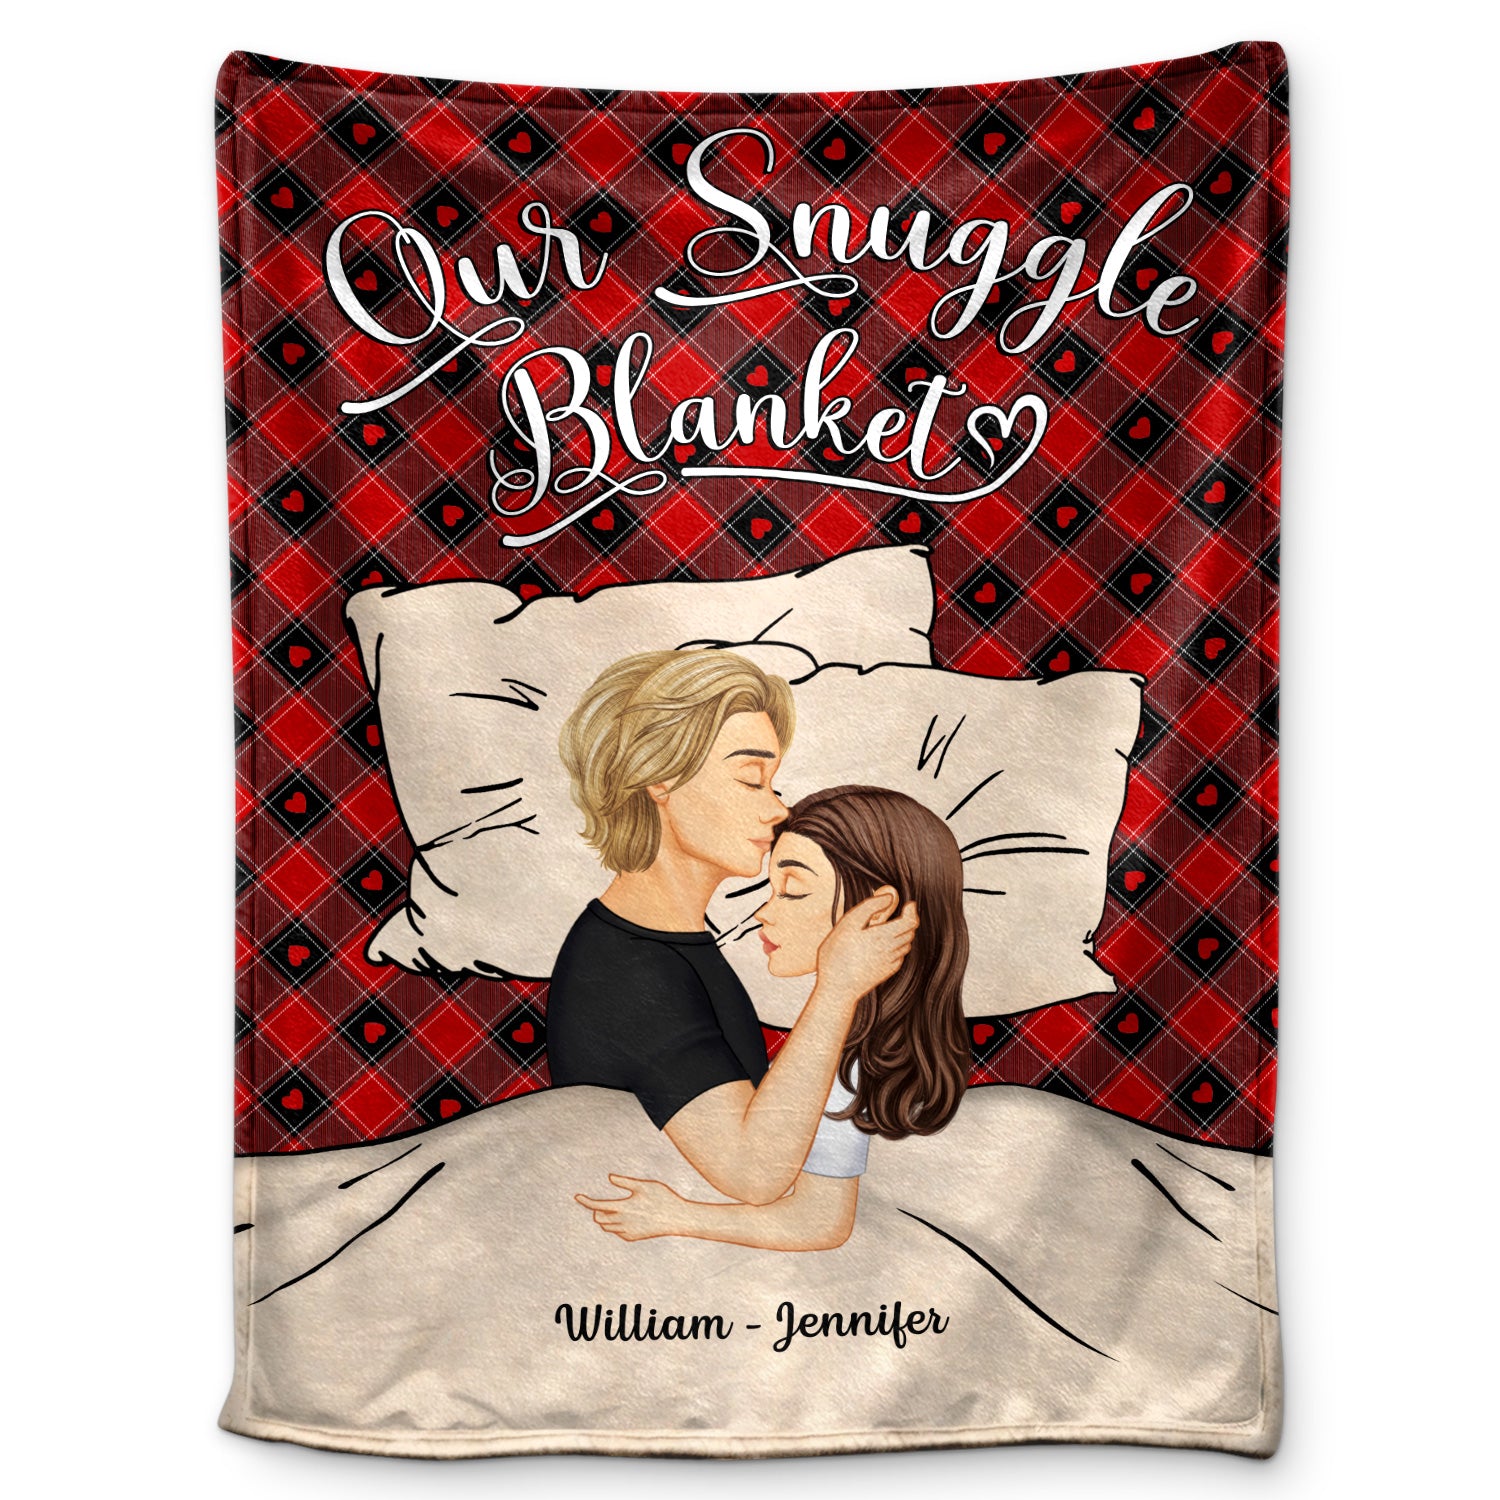 Side View Couple Our Snuggle Blanket - Gift For Couples - Personalized Fleece Blanket